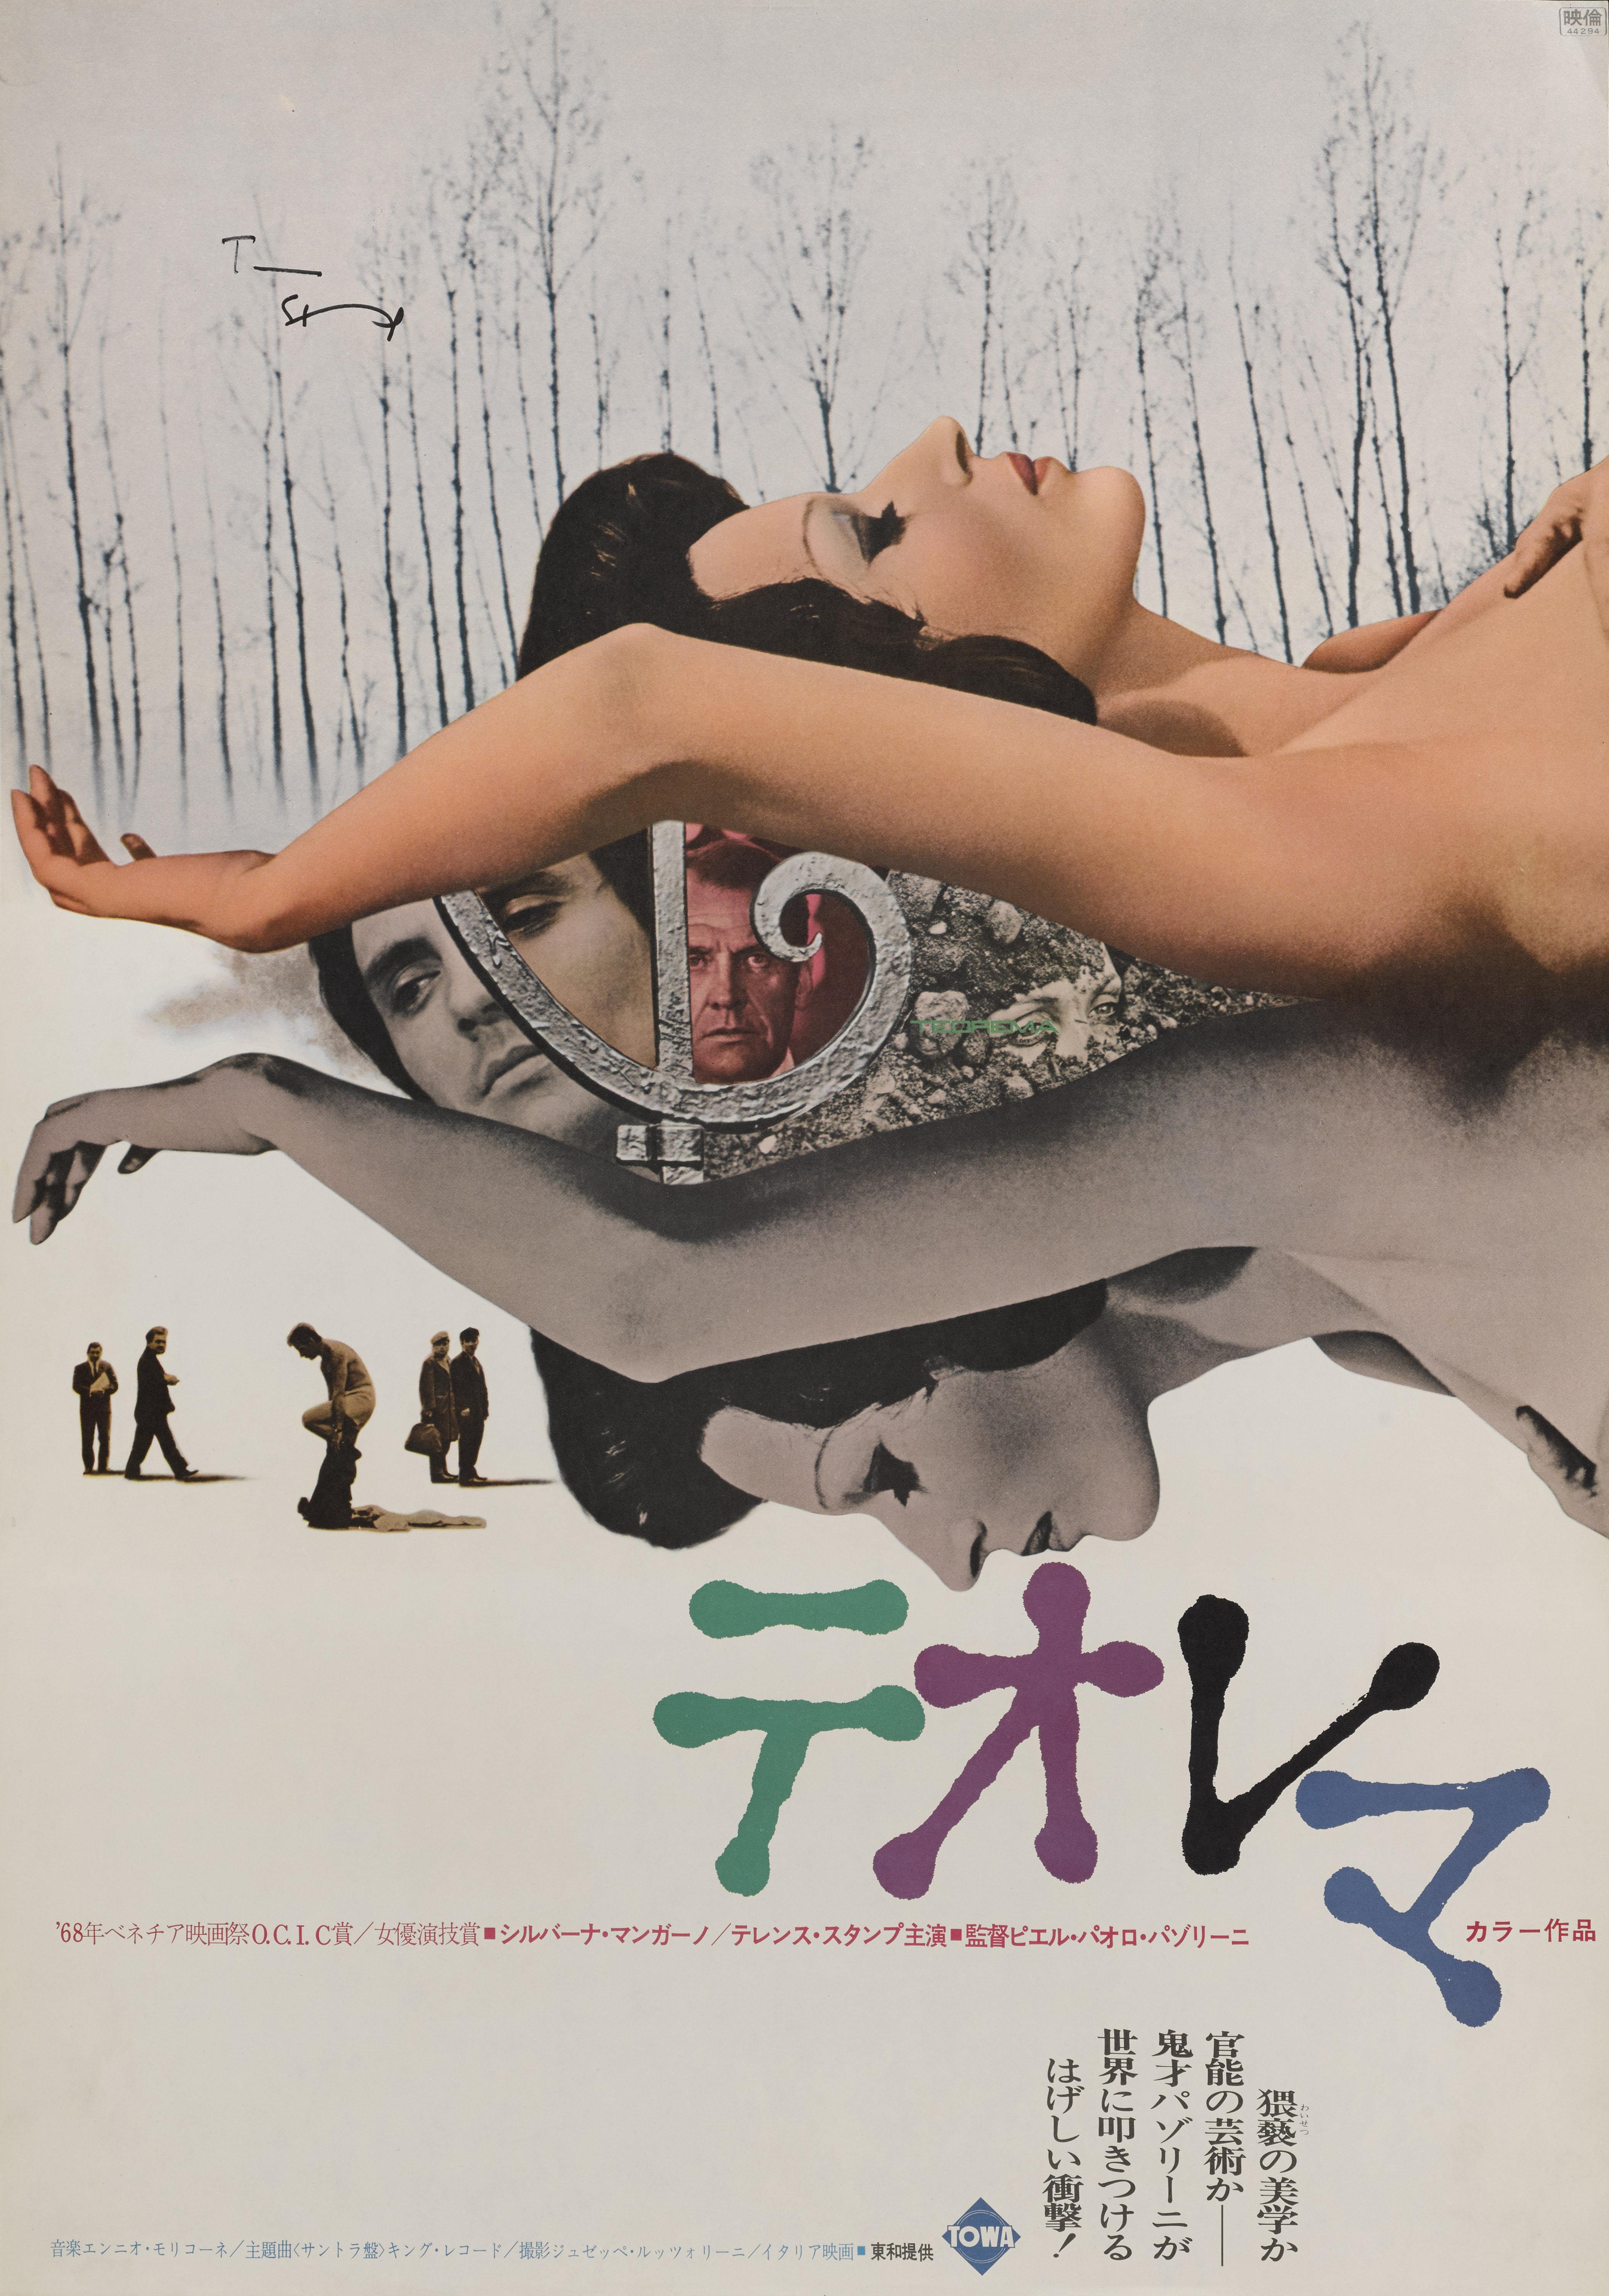 Original Japanese film poster for Teorema 1968
This film was directed by Pier Paolo Pasolini, and stars Silvana Mangano, Terence Stamp and Massimo Girotti. It tells the story of a strange visitor to a wealthy family, who seduces each family member,